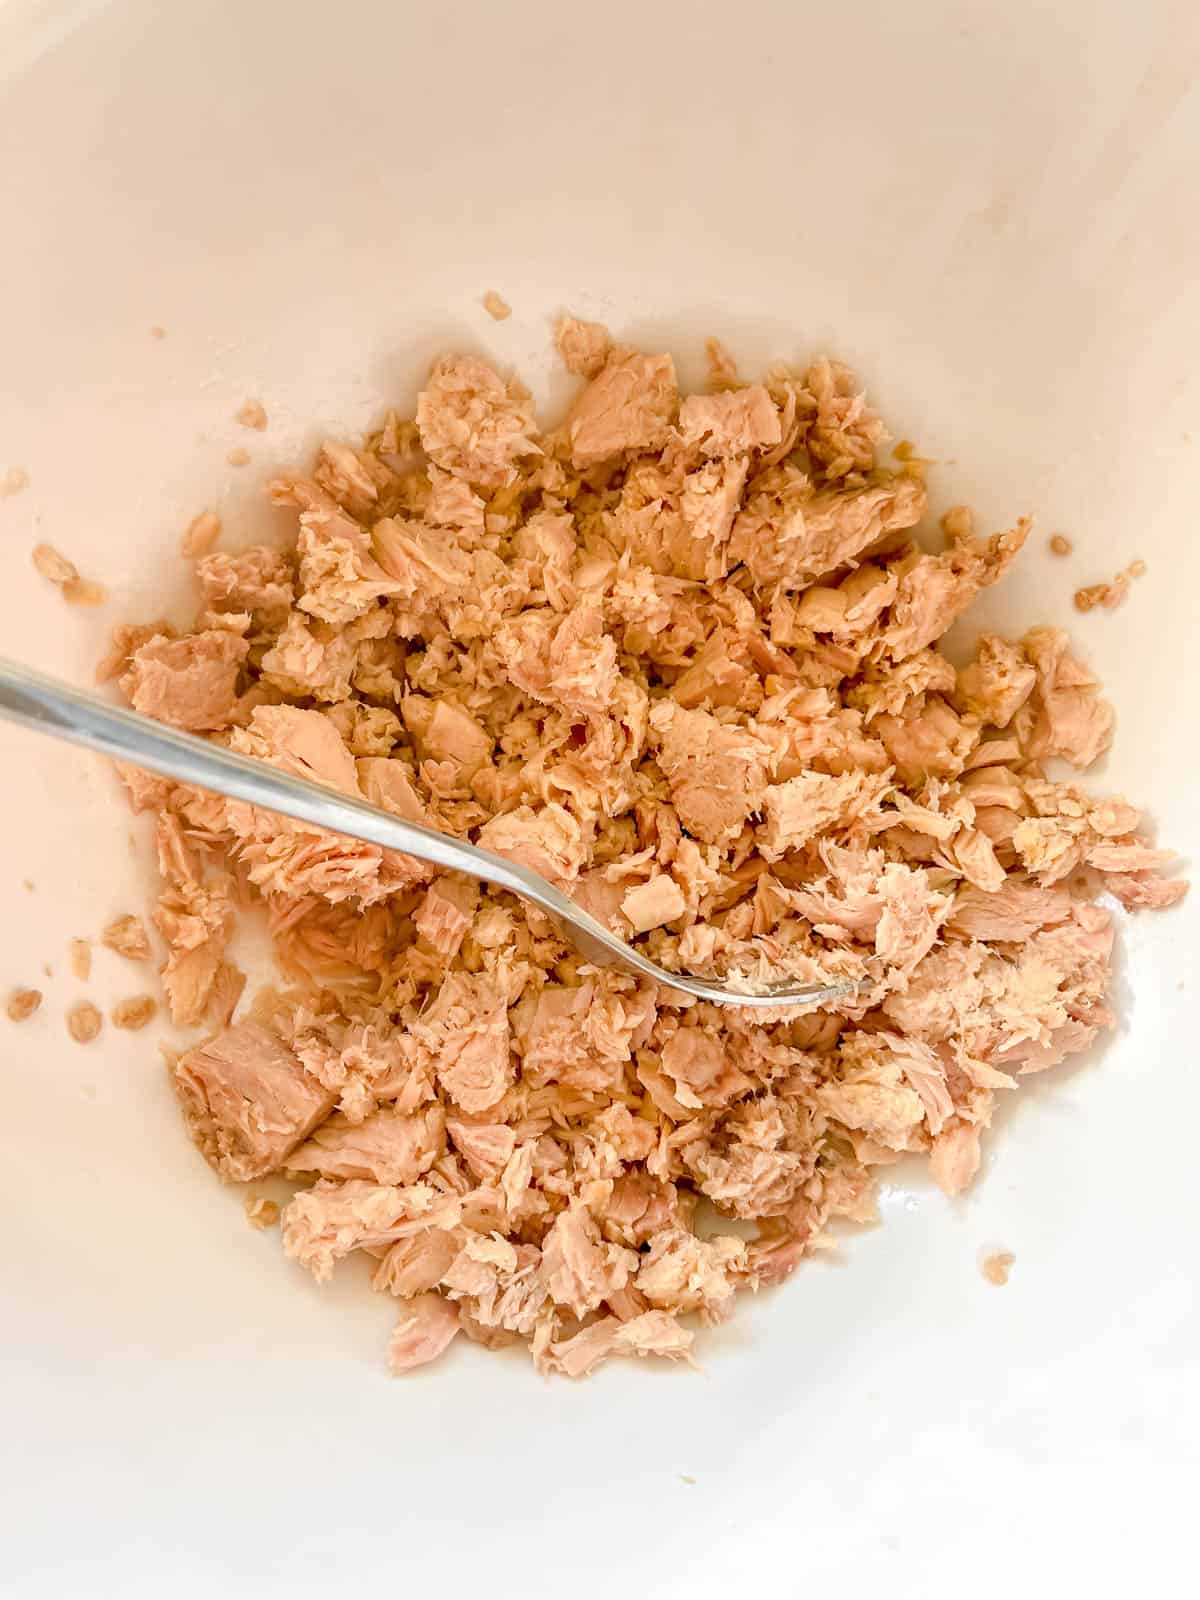 Tuna in a bowl, broken up into pieces by a fork.